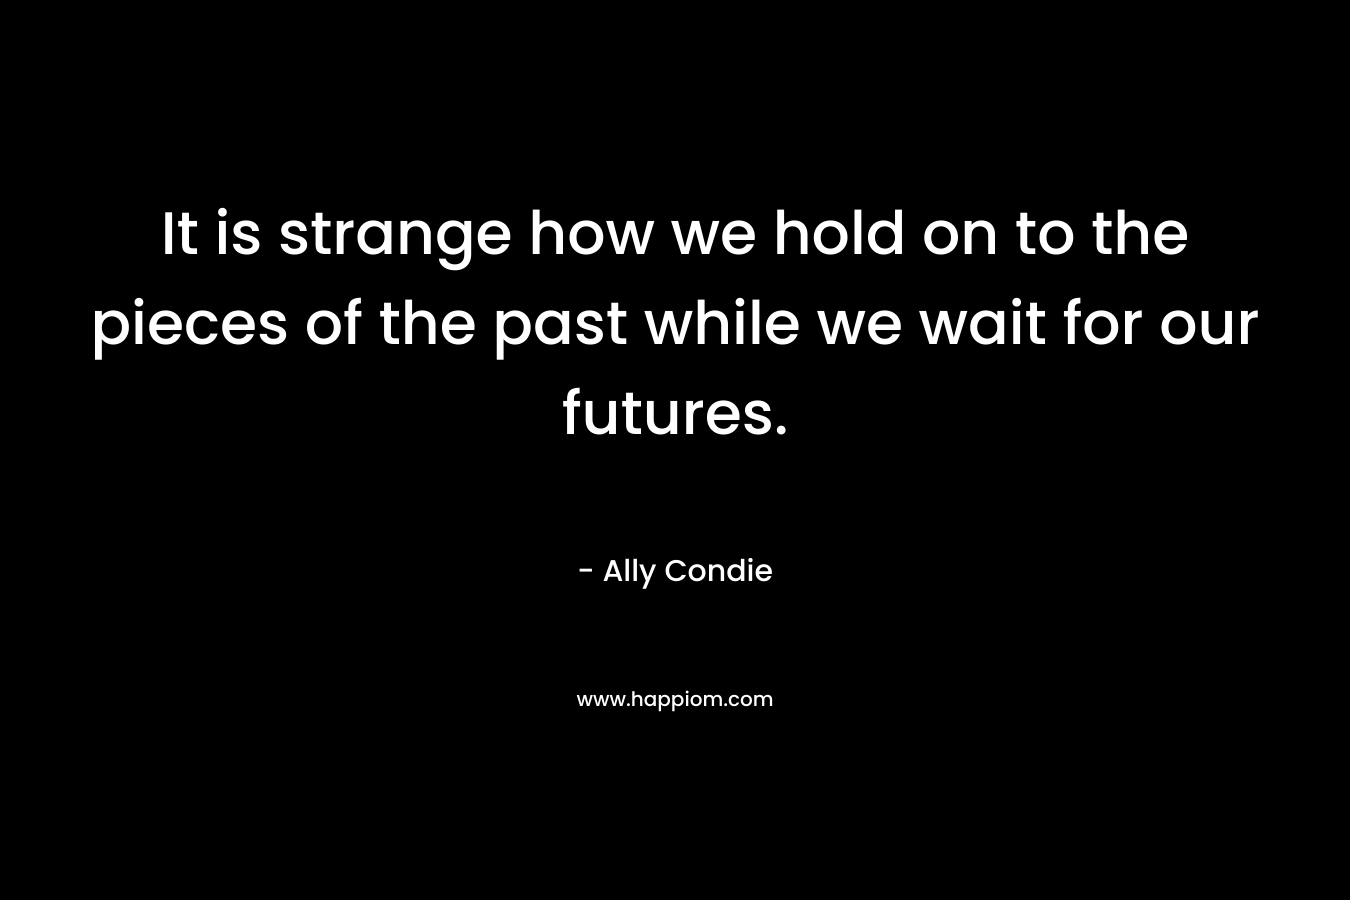 It is strange how we hold on to the pieces of the past while we wait for our futures.